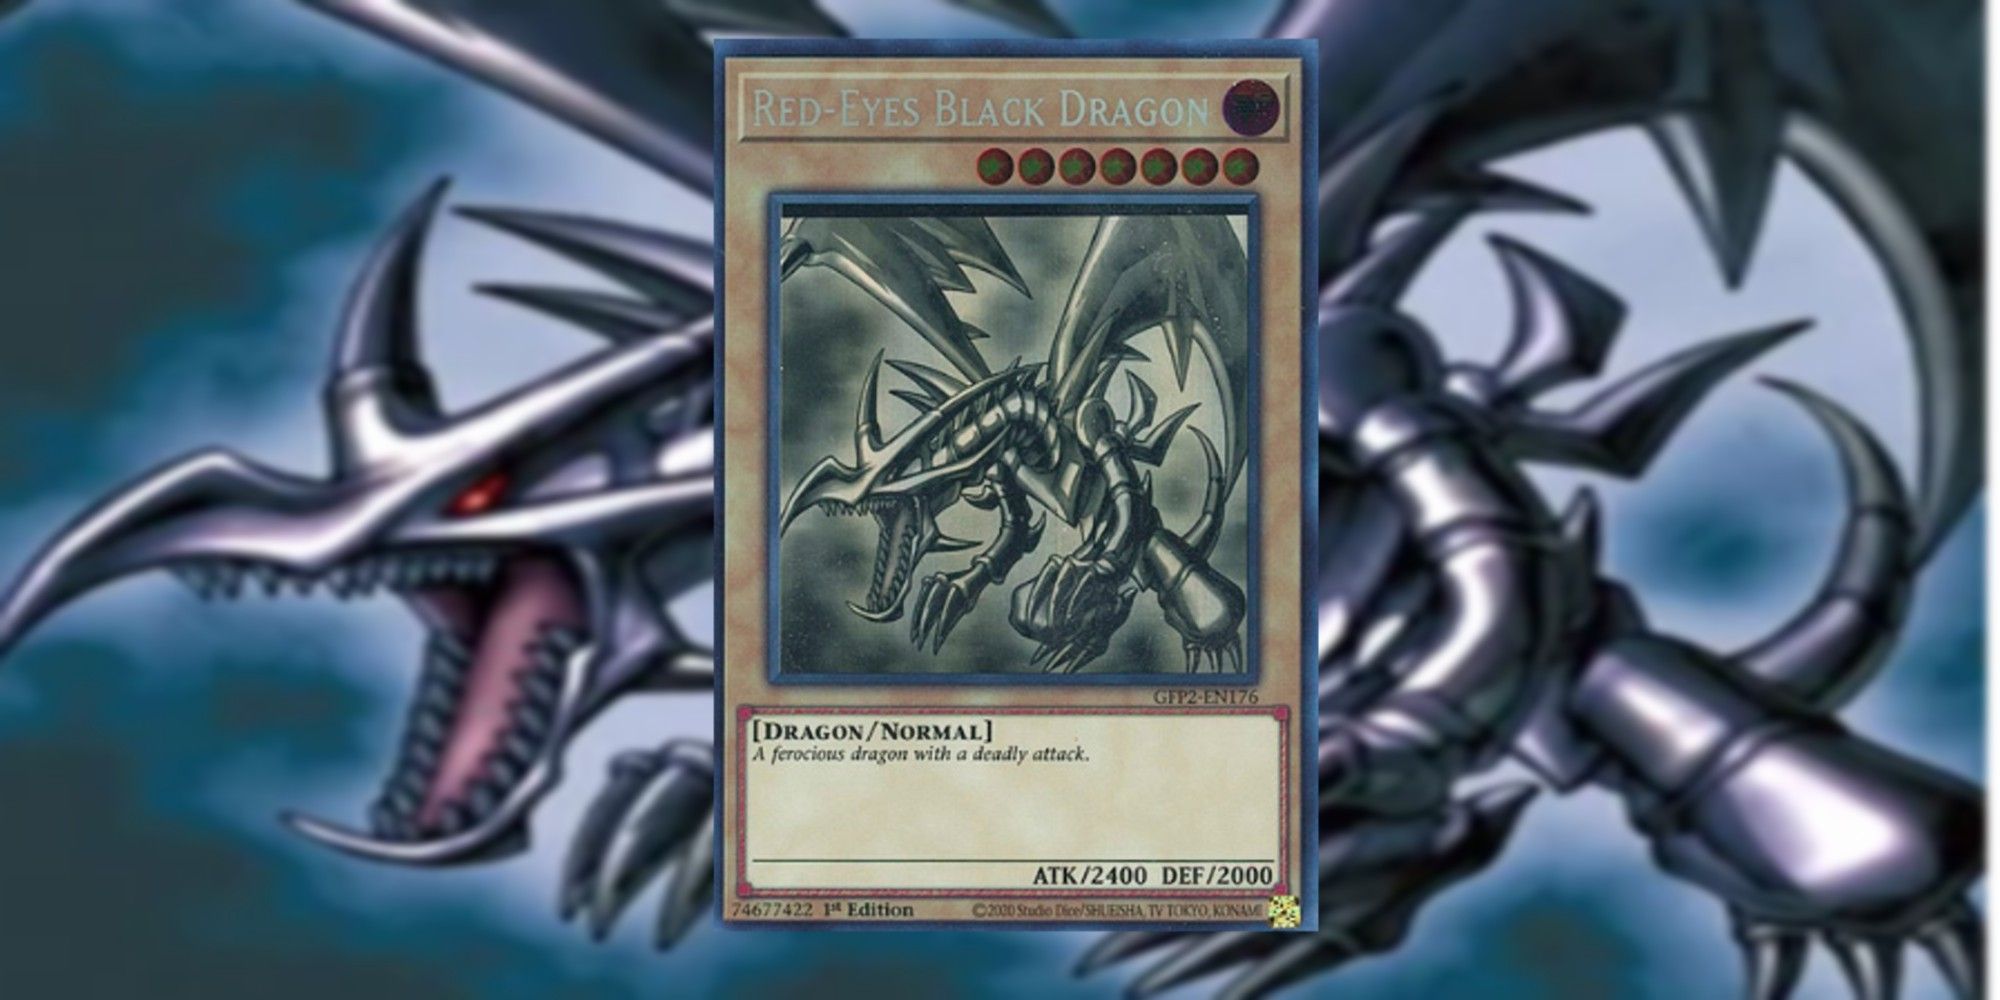 Yugioh Red-Eyes Black Dragon card and art background